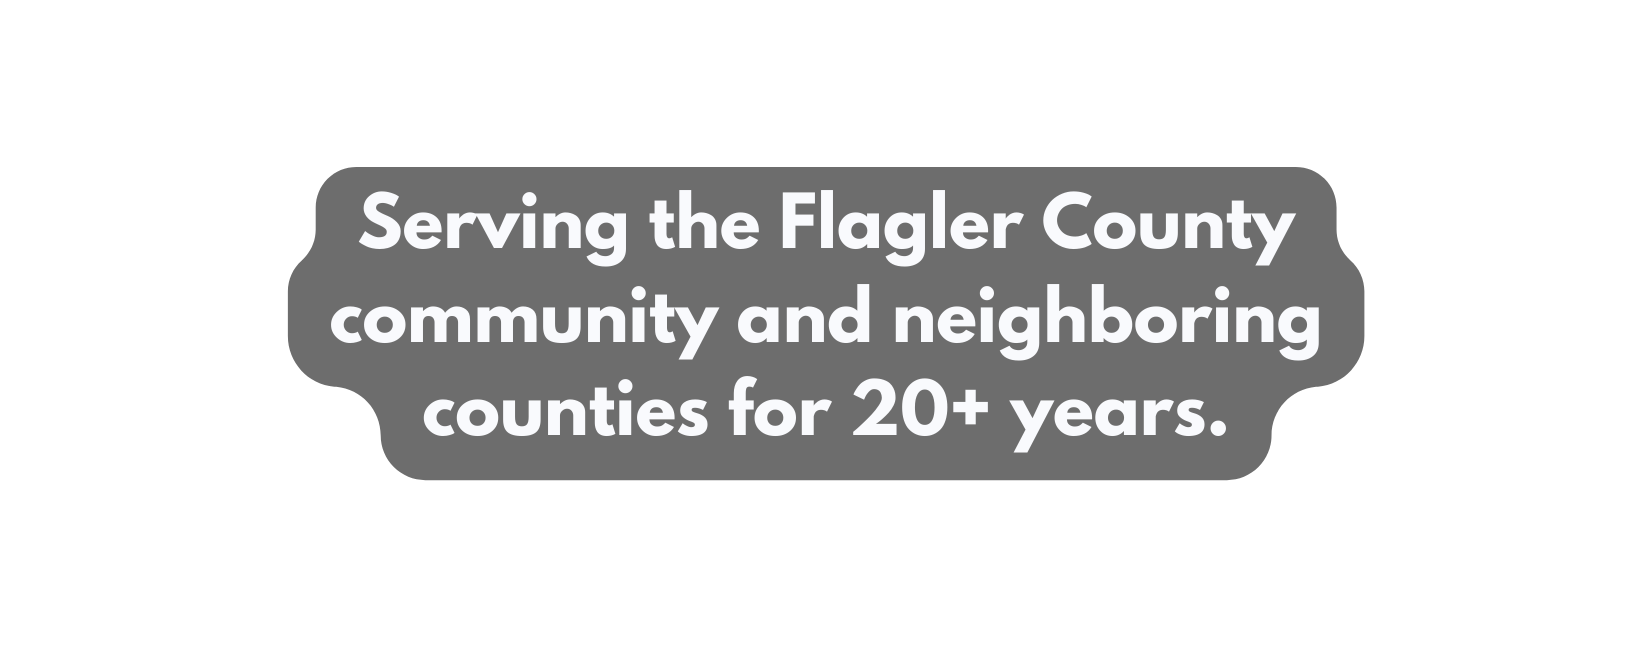 Serving the Flagler County community and neighboring counties for 20 years